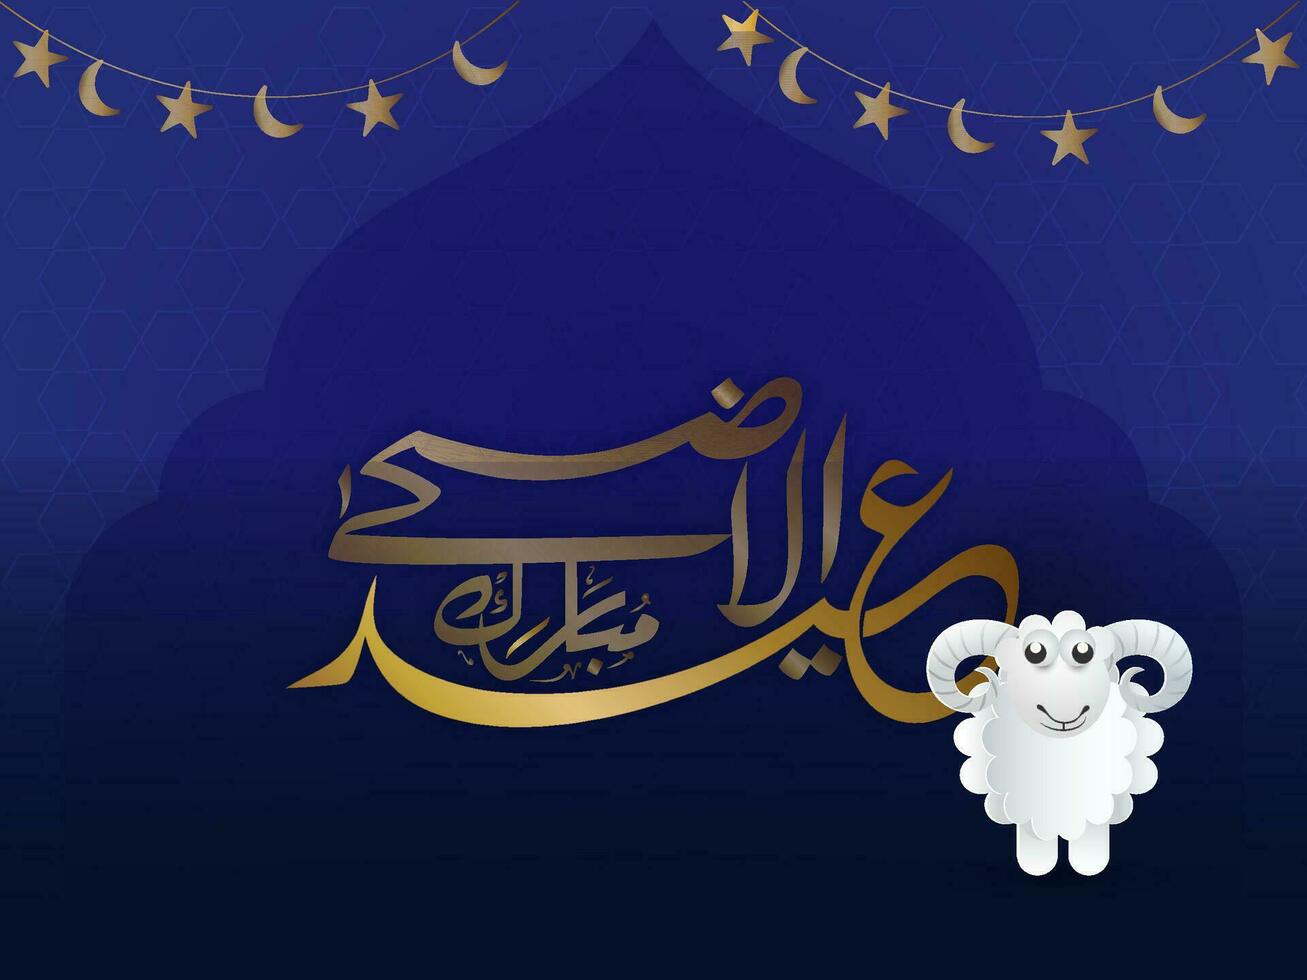 Golden Arabic Calligraphy of Eid-Al-Adha Mubarak with Paper-Art Cartoon Sheep and Garland of Crescent, Stars Decorated on Blue Background. vector